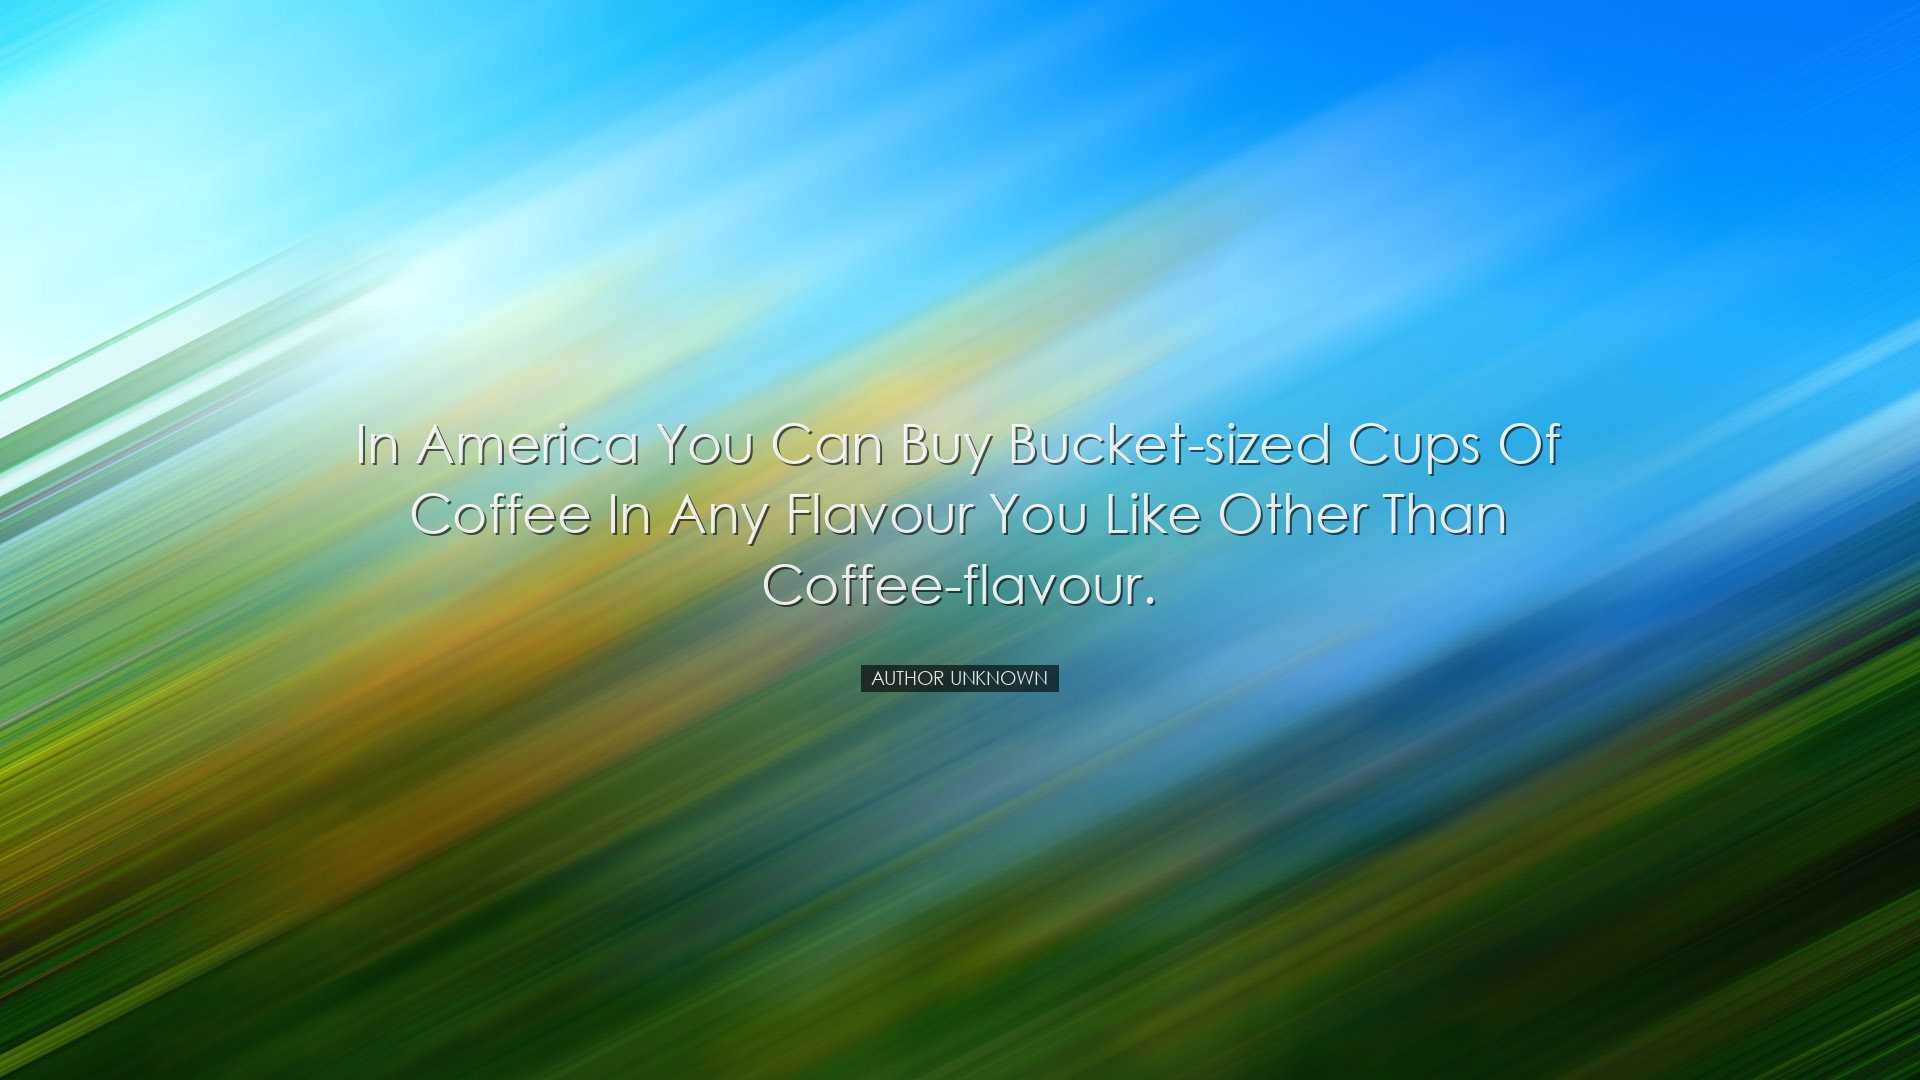 In America you can buy bucket-sized cups of coffee in any flavour